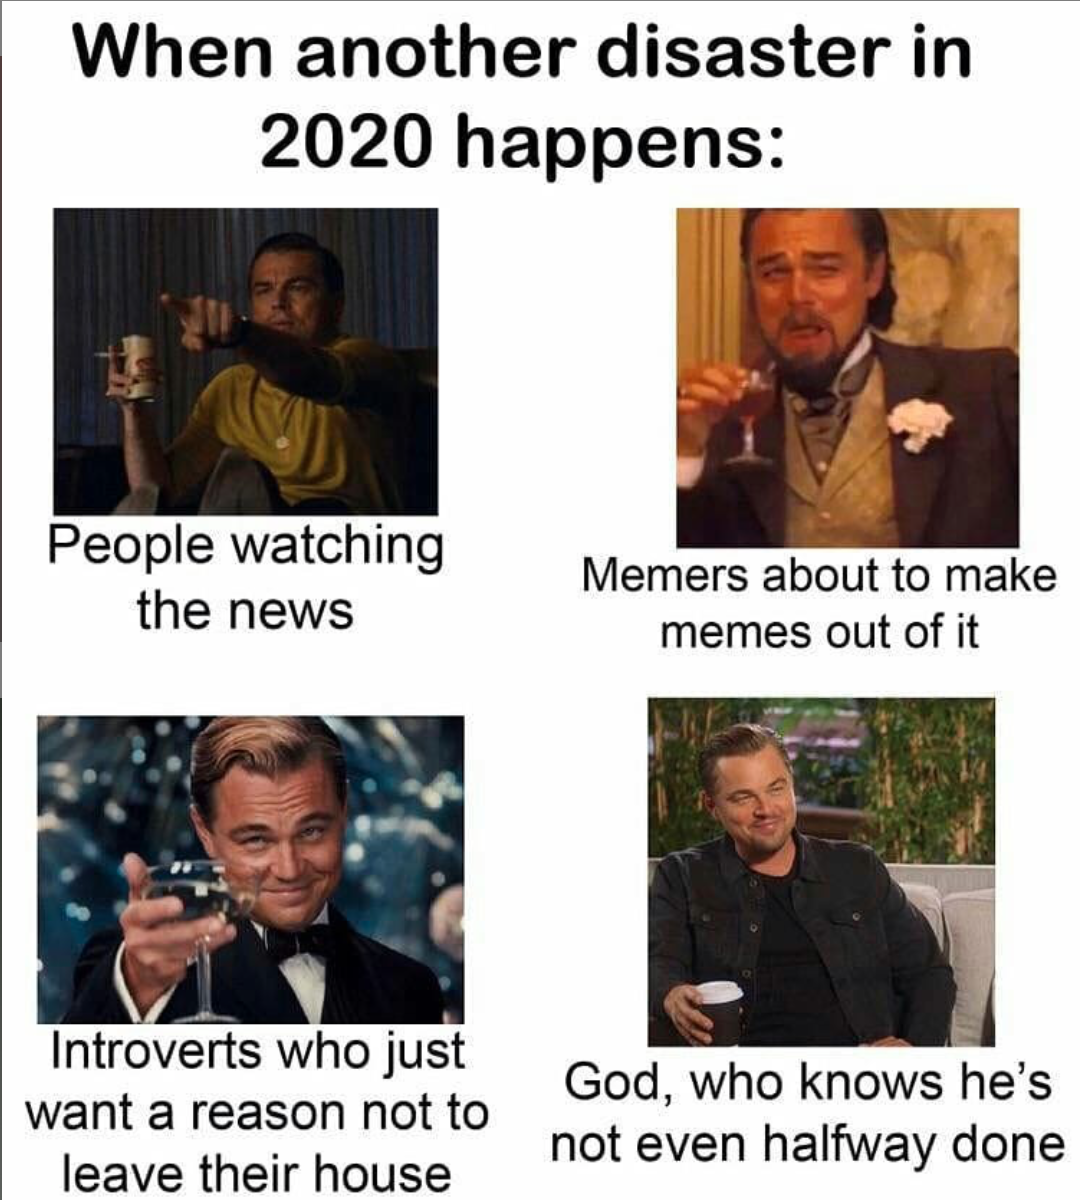 dank memes - human behavior - When another disaster in 2020 happens People watching the news Memers about to make memes out of it Introverts who just want a reason not to leave their house God, who knows he's not even halfway done